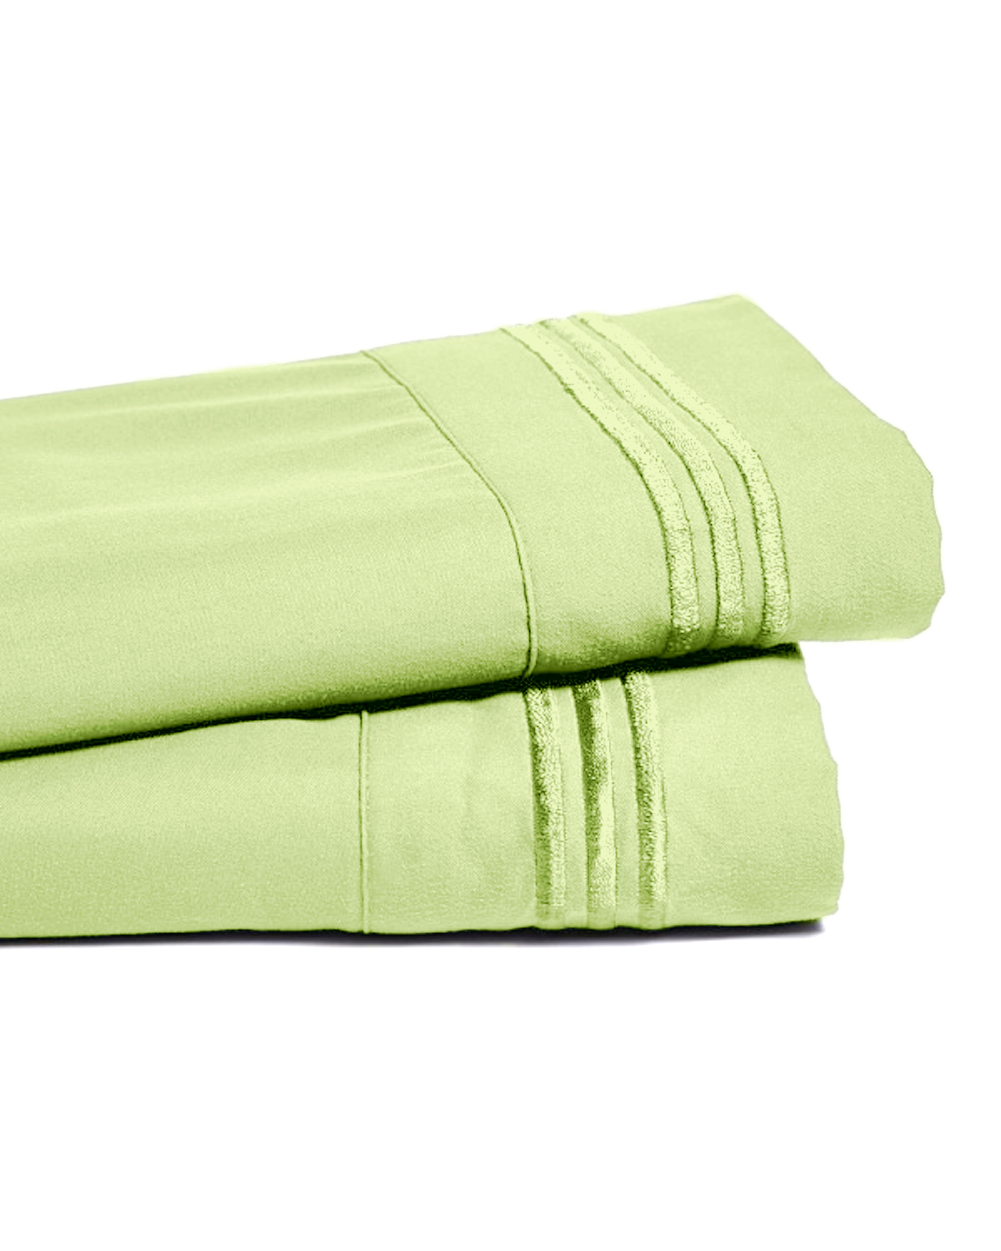 Deep Pocket Bamboo Bed Sheet - Luxury 2200 Embroidered Wrinkle, Fade and Stain Resistant Sheets - Mint Green King Size